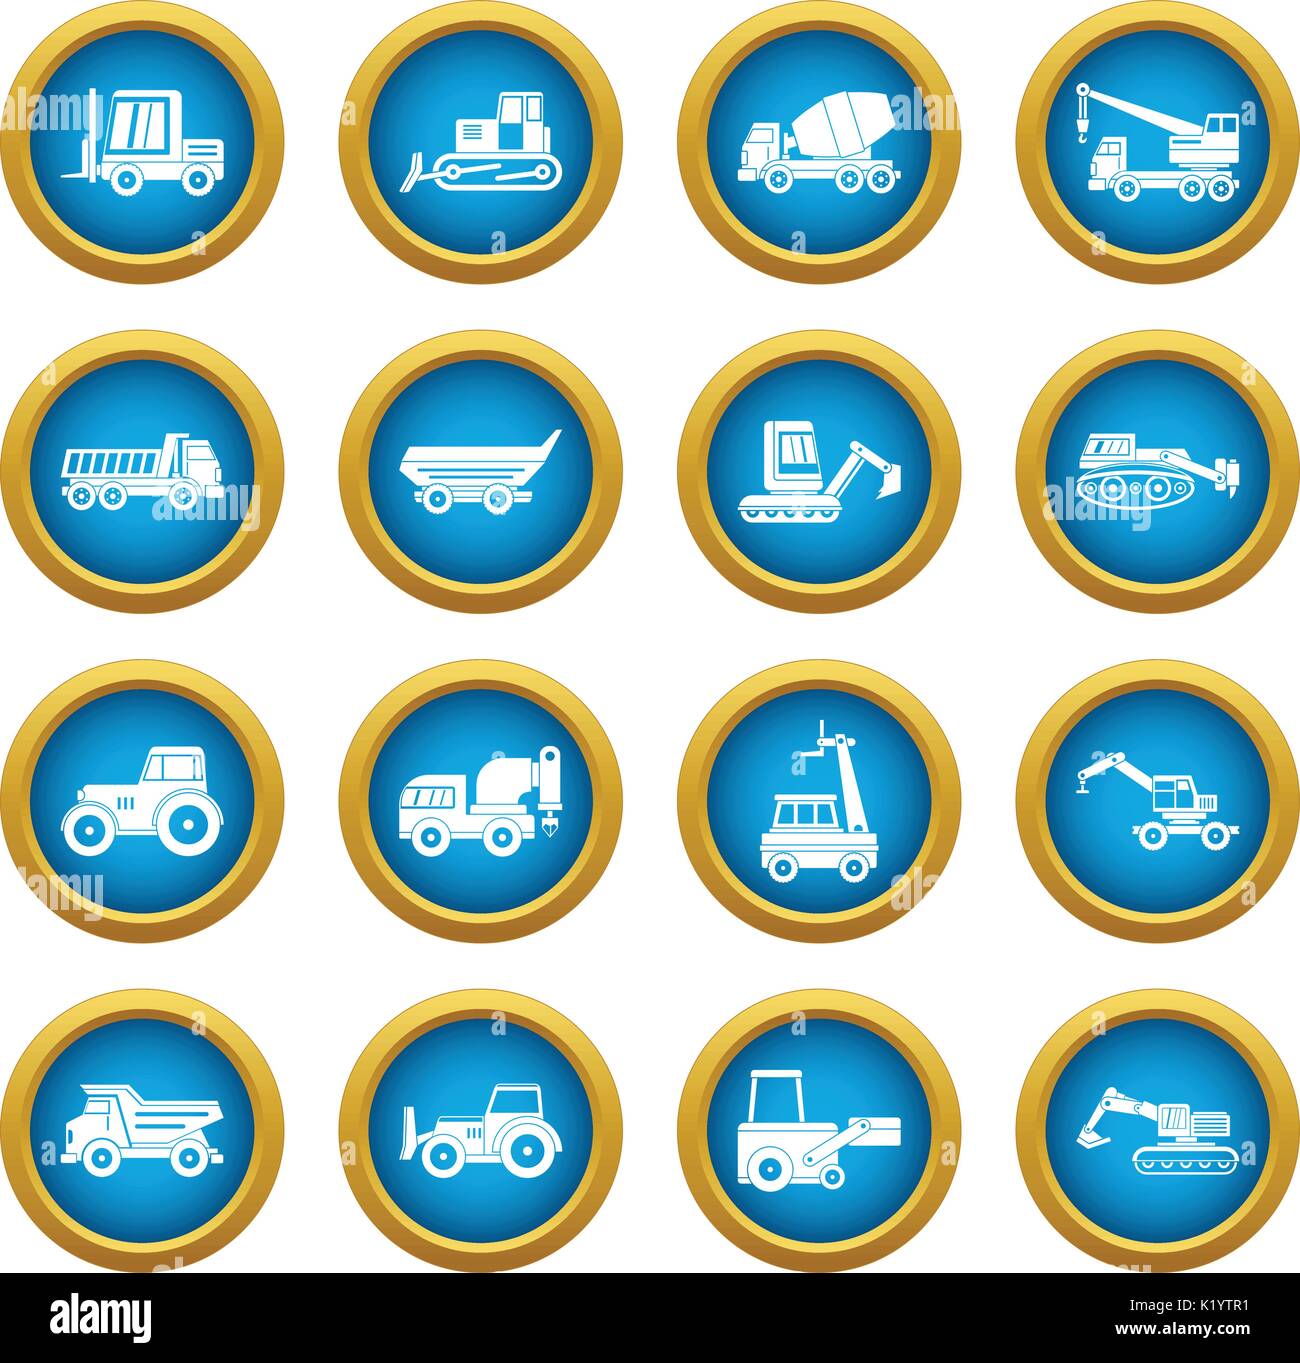 Building vehicles icons blue circle set Stock Vector